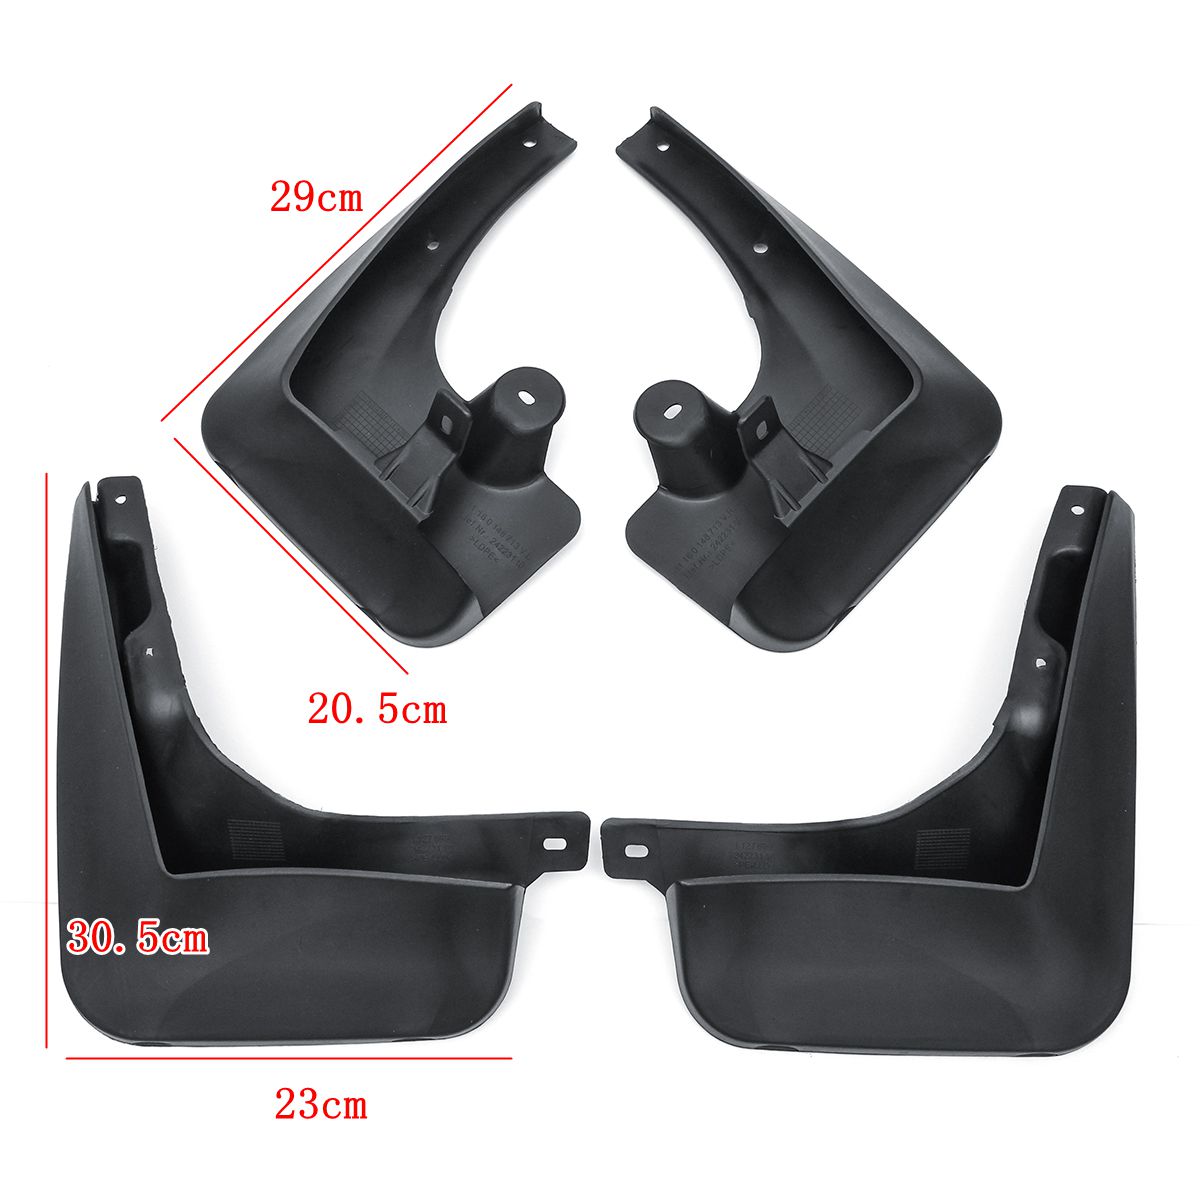 4Pcs-Car-Black-Front-and-Rear-Mud-Flaps-Mudguards-For-BMW-5-Series-G30-2017-2018-1557352